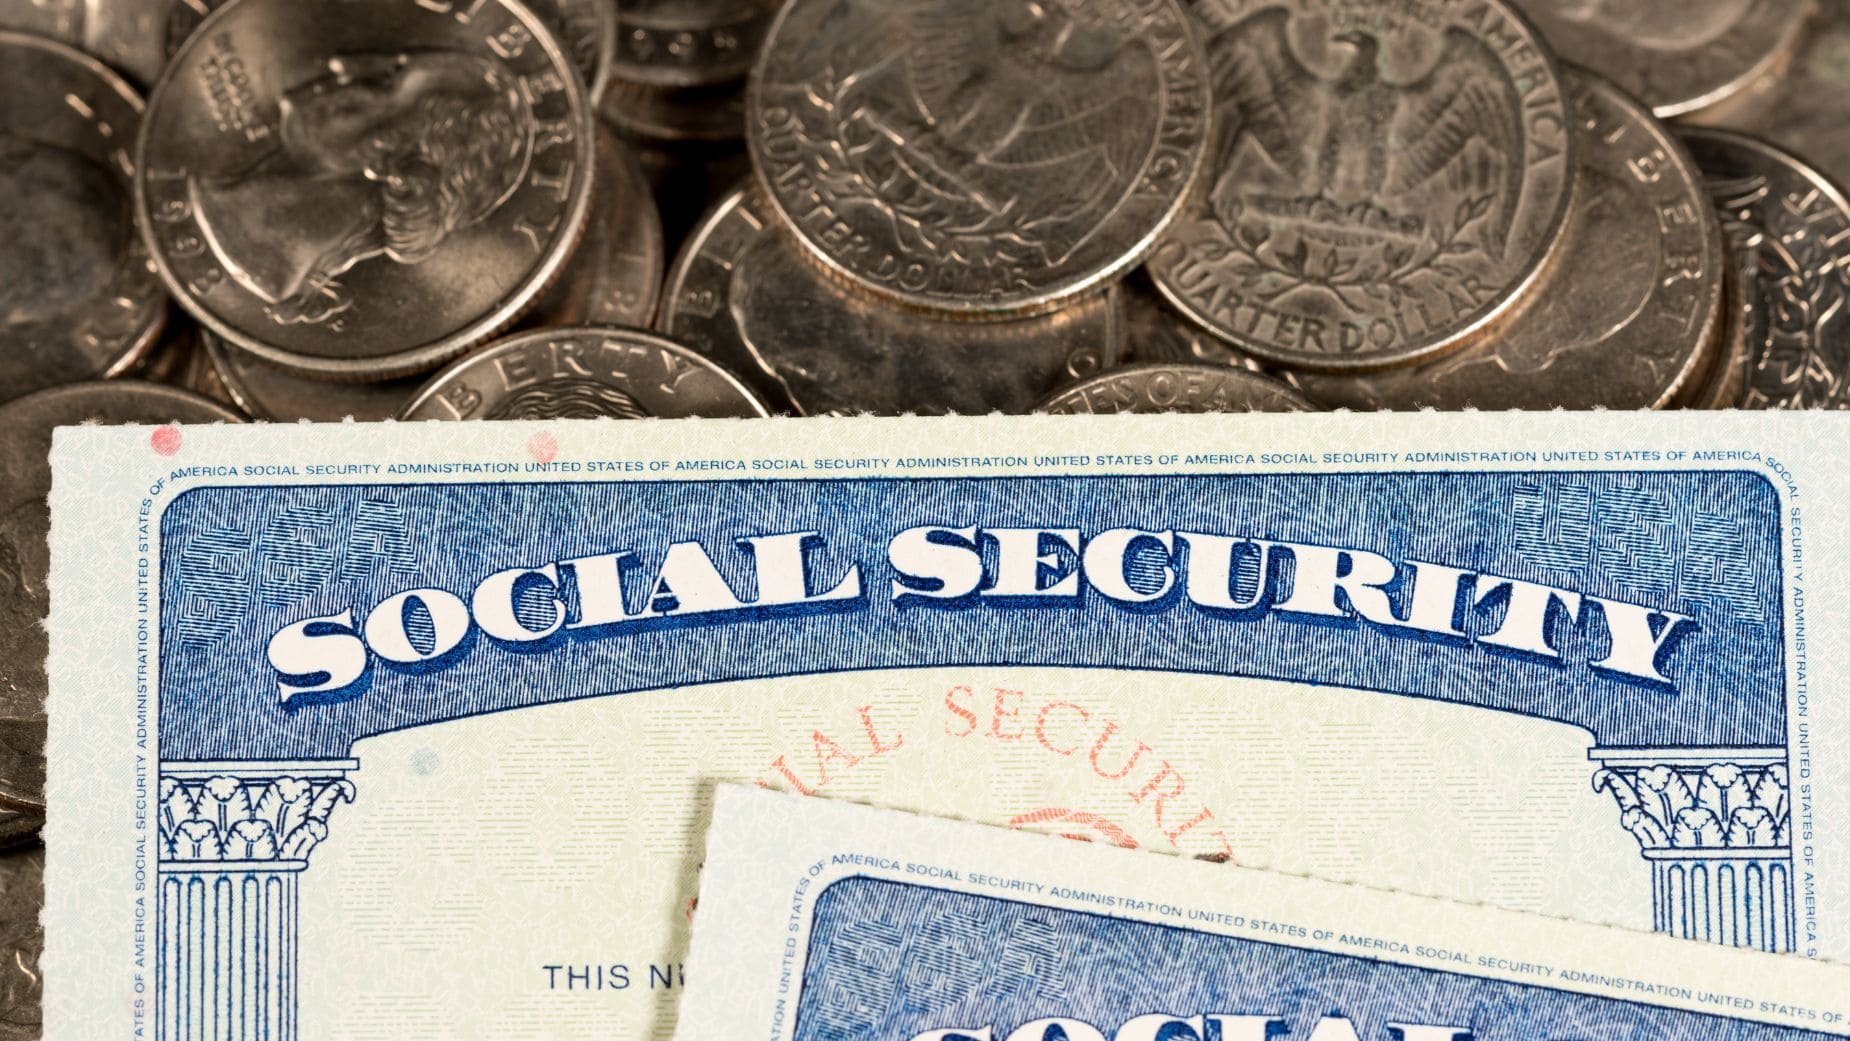 These requirements are mandatory to get the Social Security payment in this week